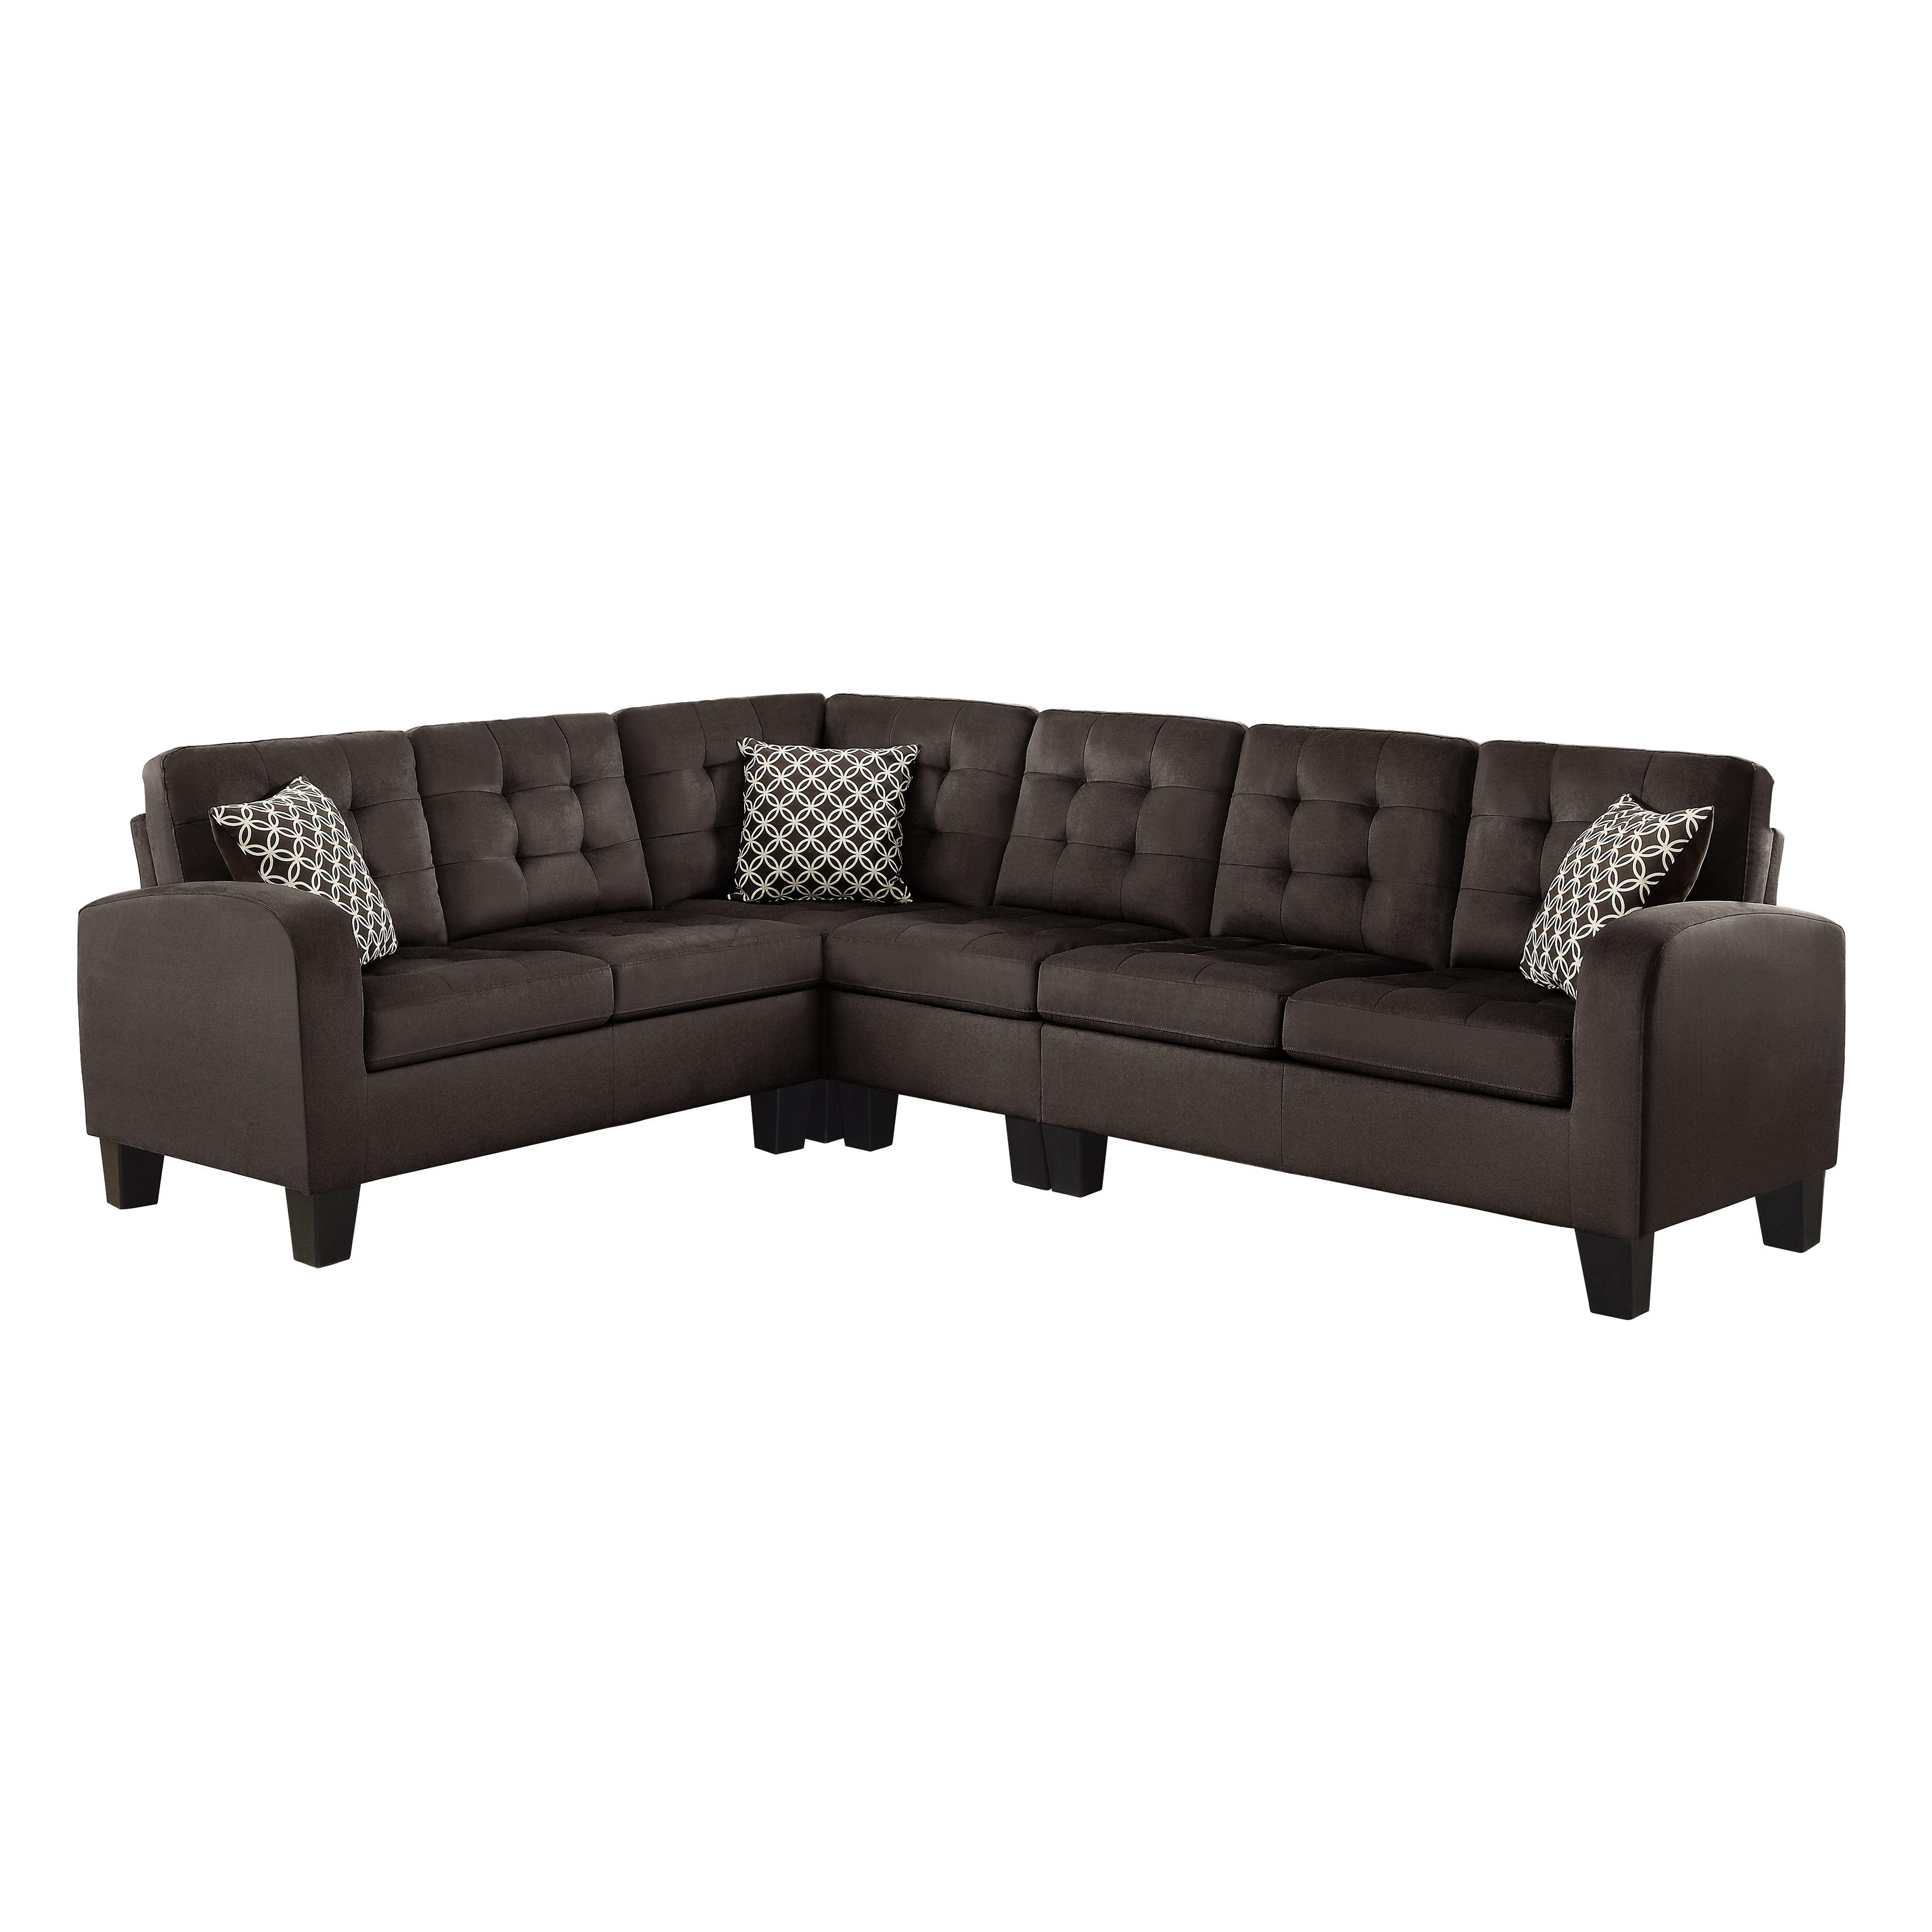 Classic Sectional 8202CH*SC Sinclair 8202CH*SC in Chocolate 